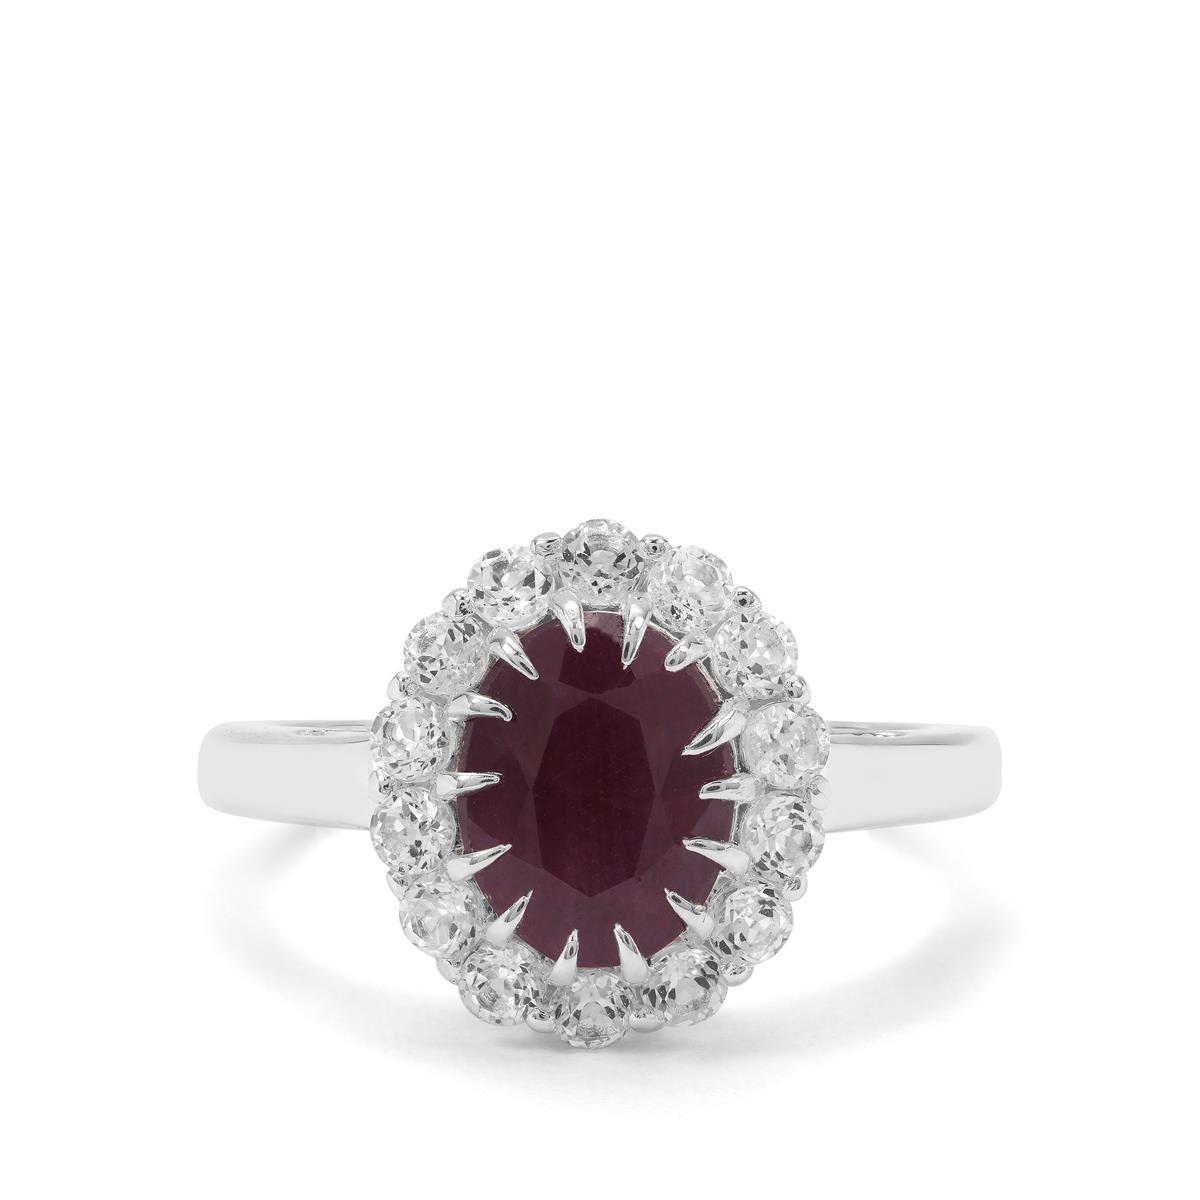 Bharat Ruby & White Topaz Sterling Silver Ring ATGW 3.54cts | Gemporia